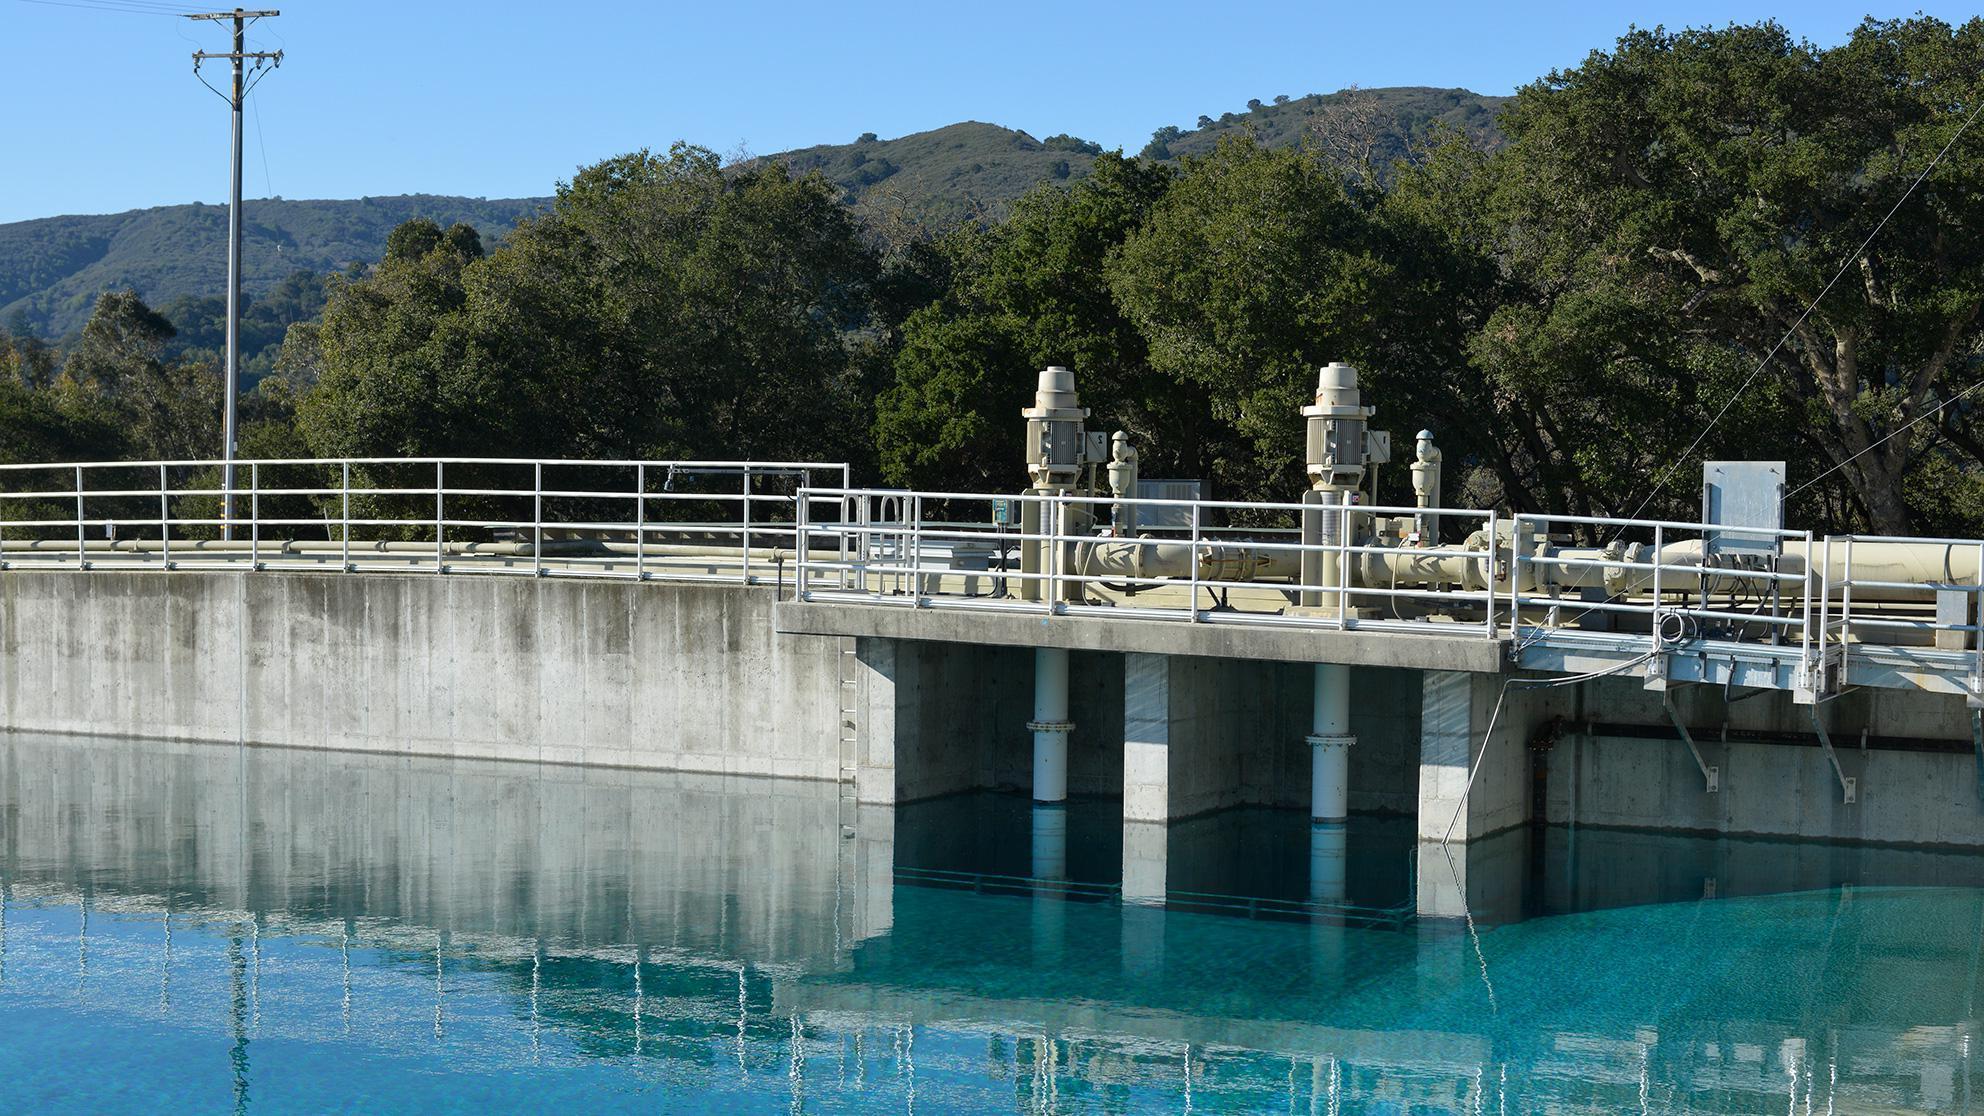 Water reservoir with green hills and blue sky in the background